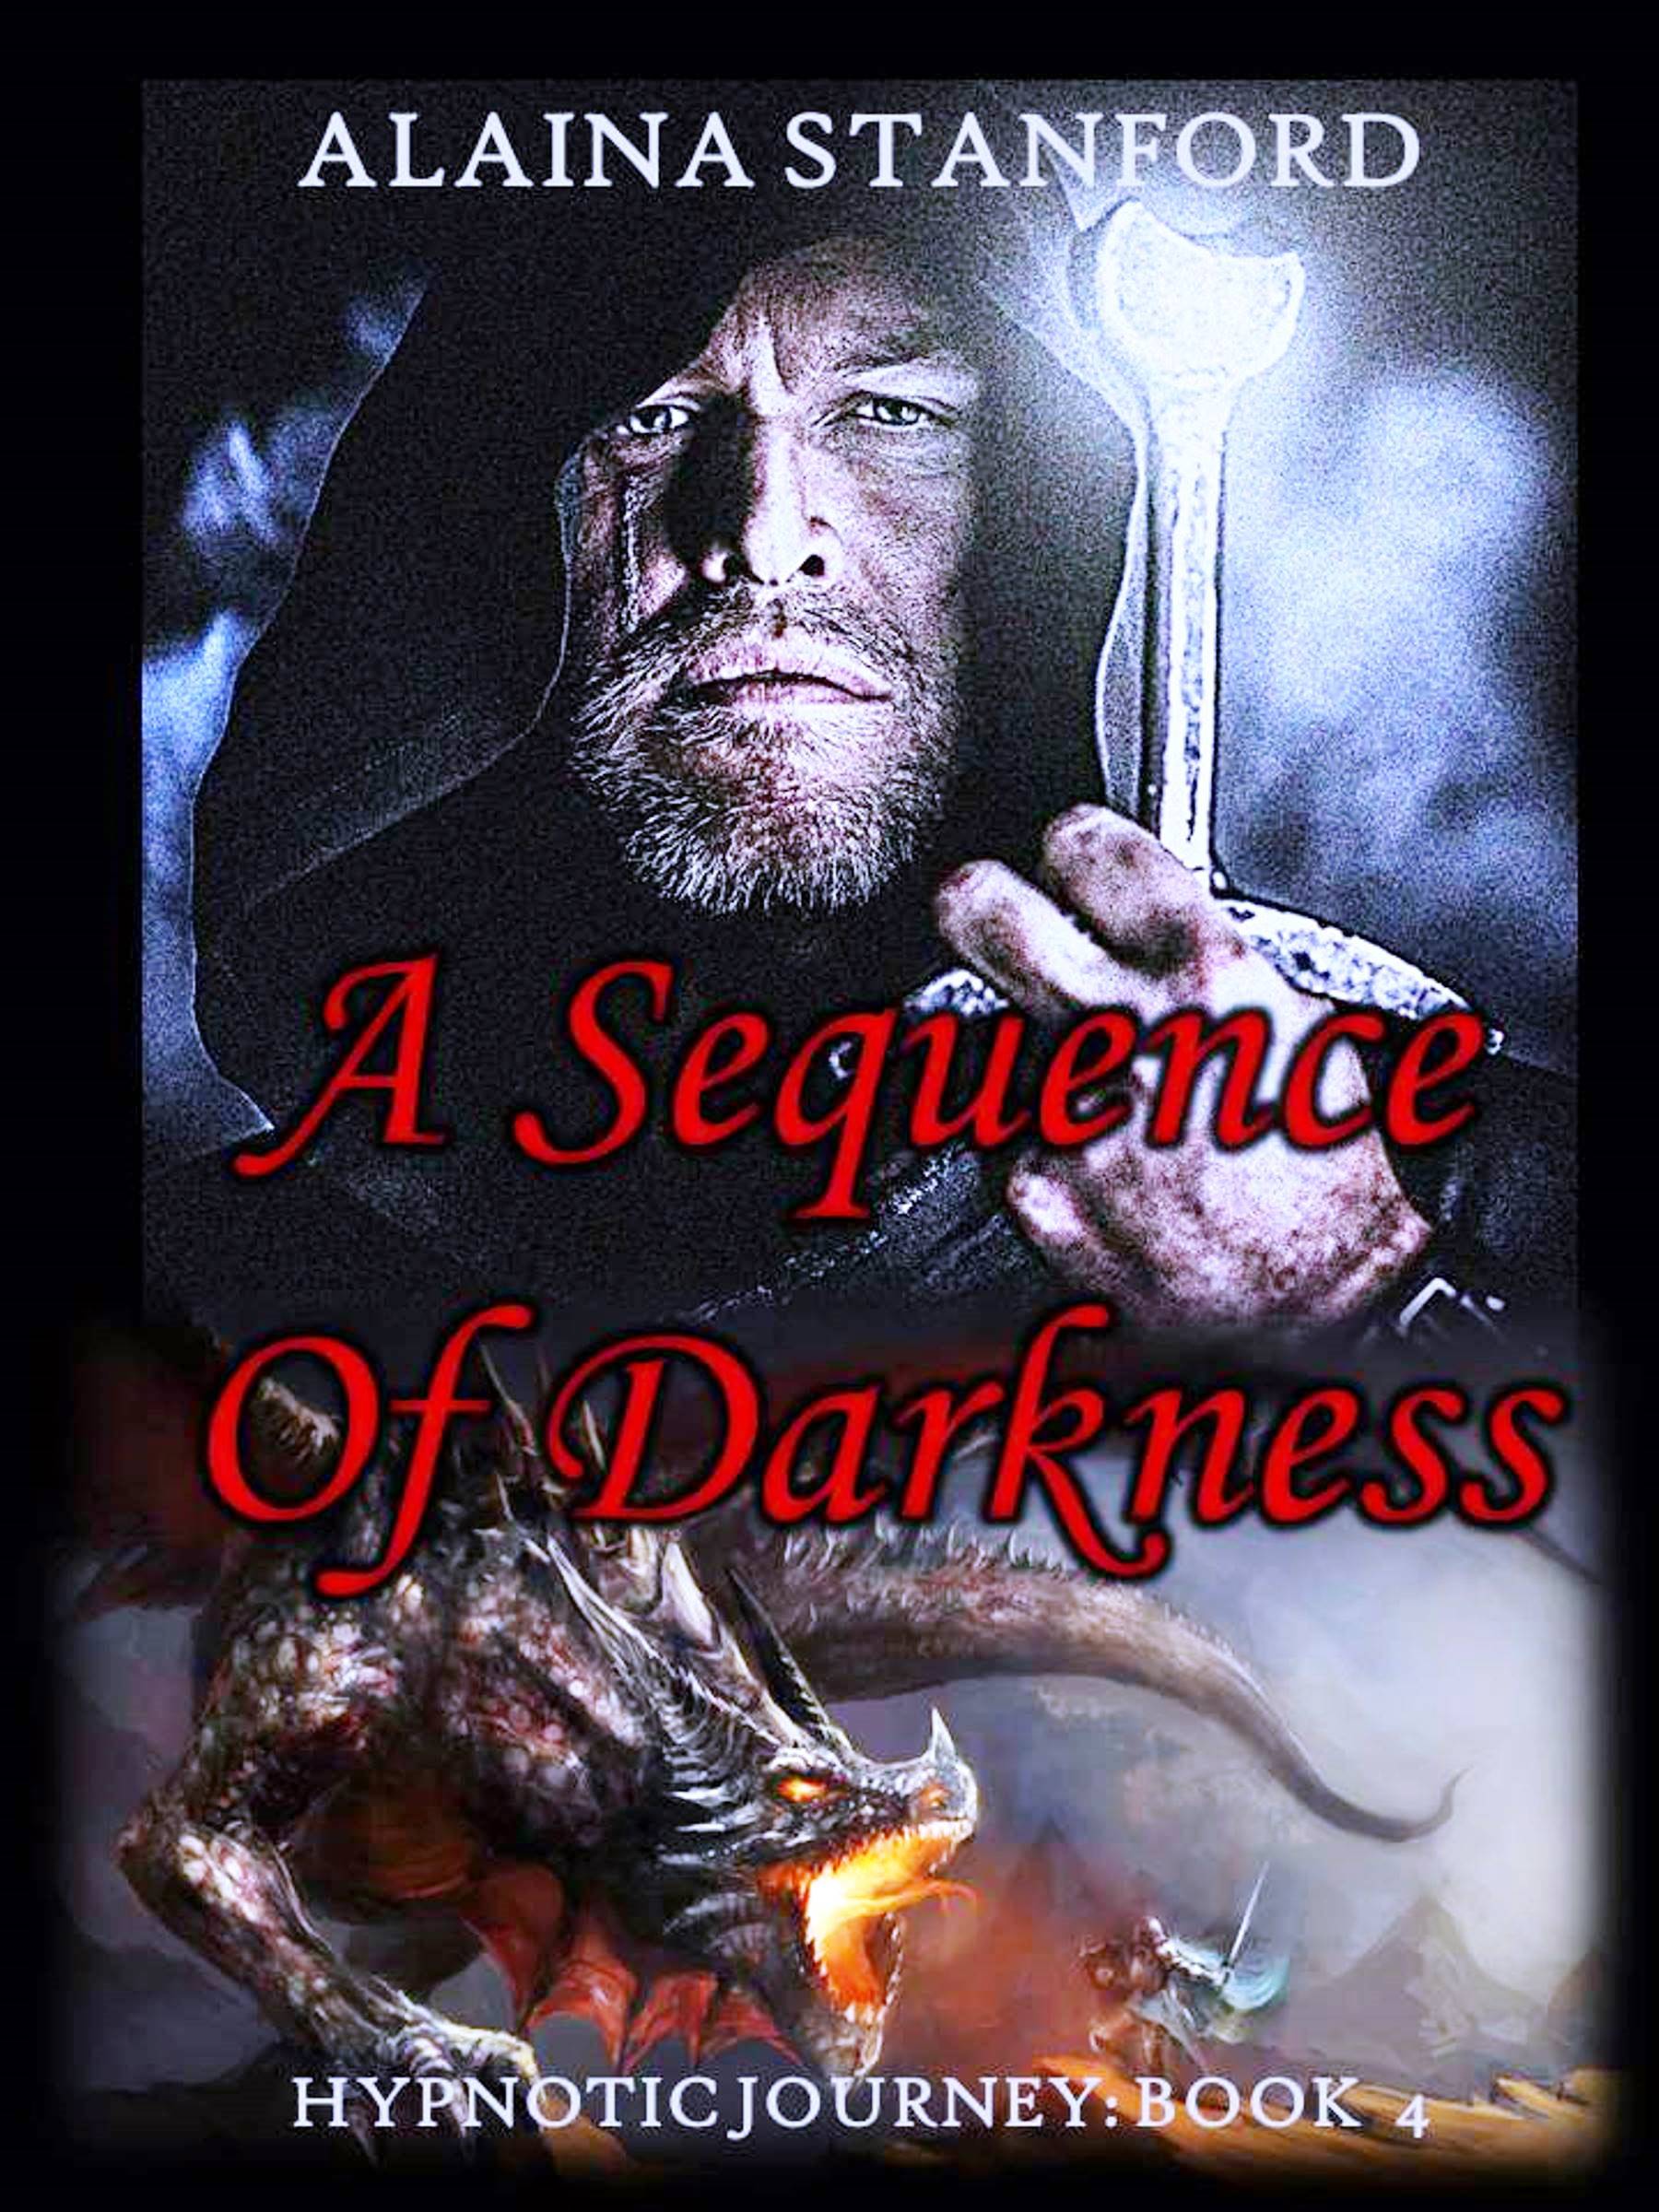 A Sequence of Darkness new cover 2018 A.jpg